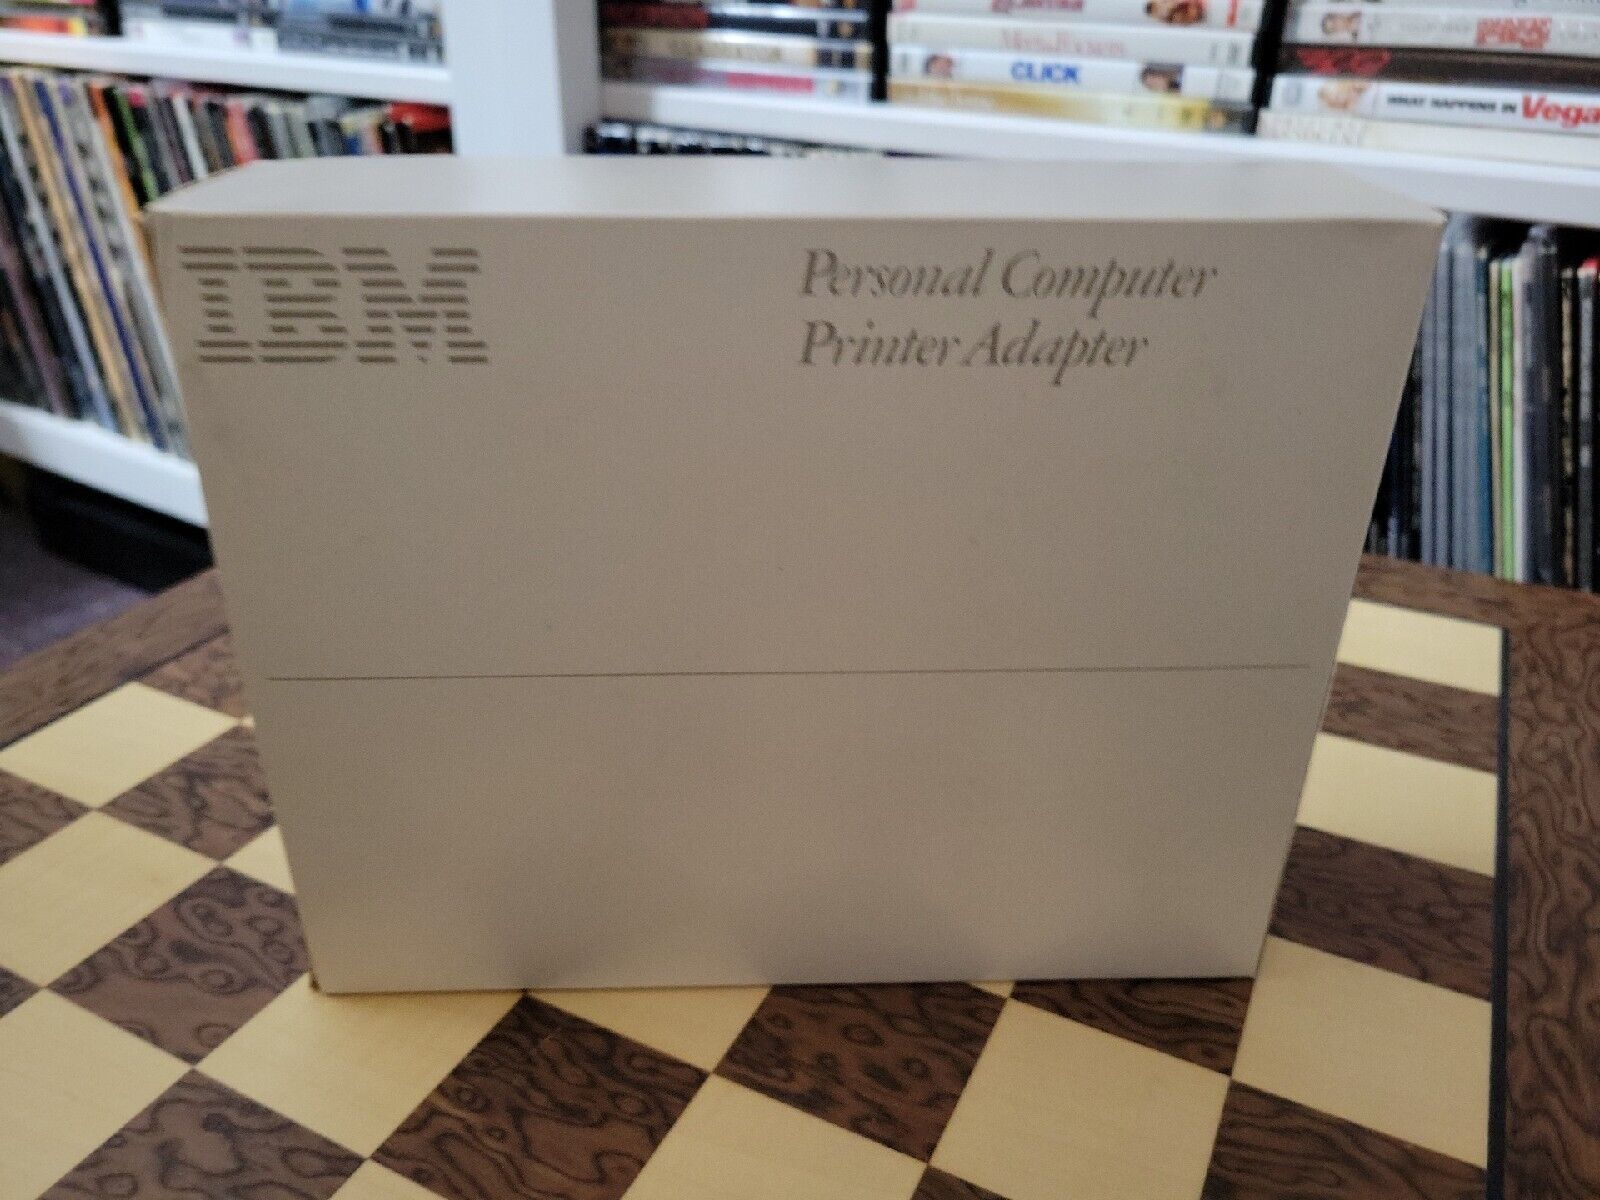 IBM Personal Computer Printer Adapter 1505200 - Parallel Port - New